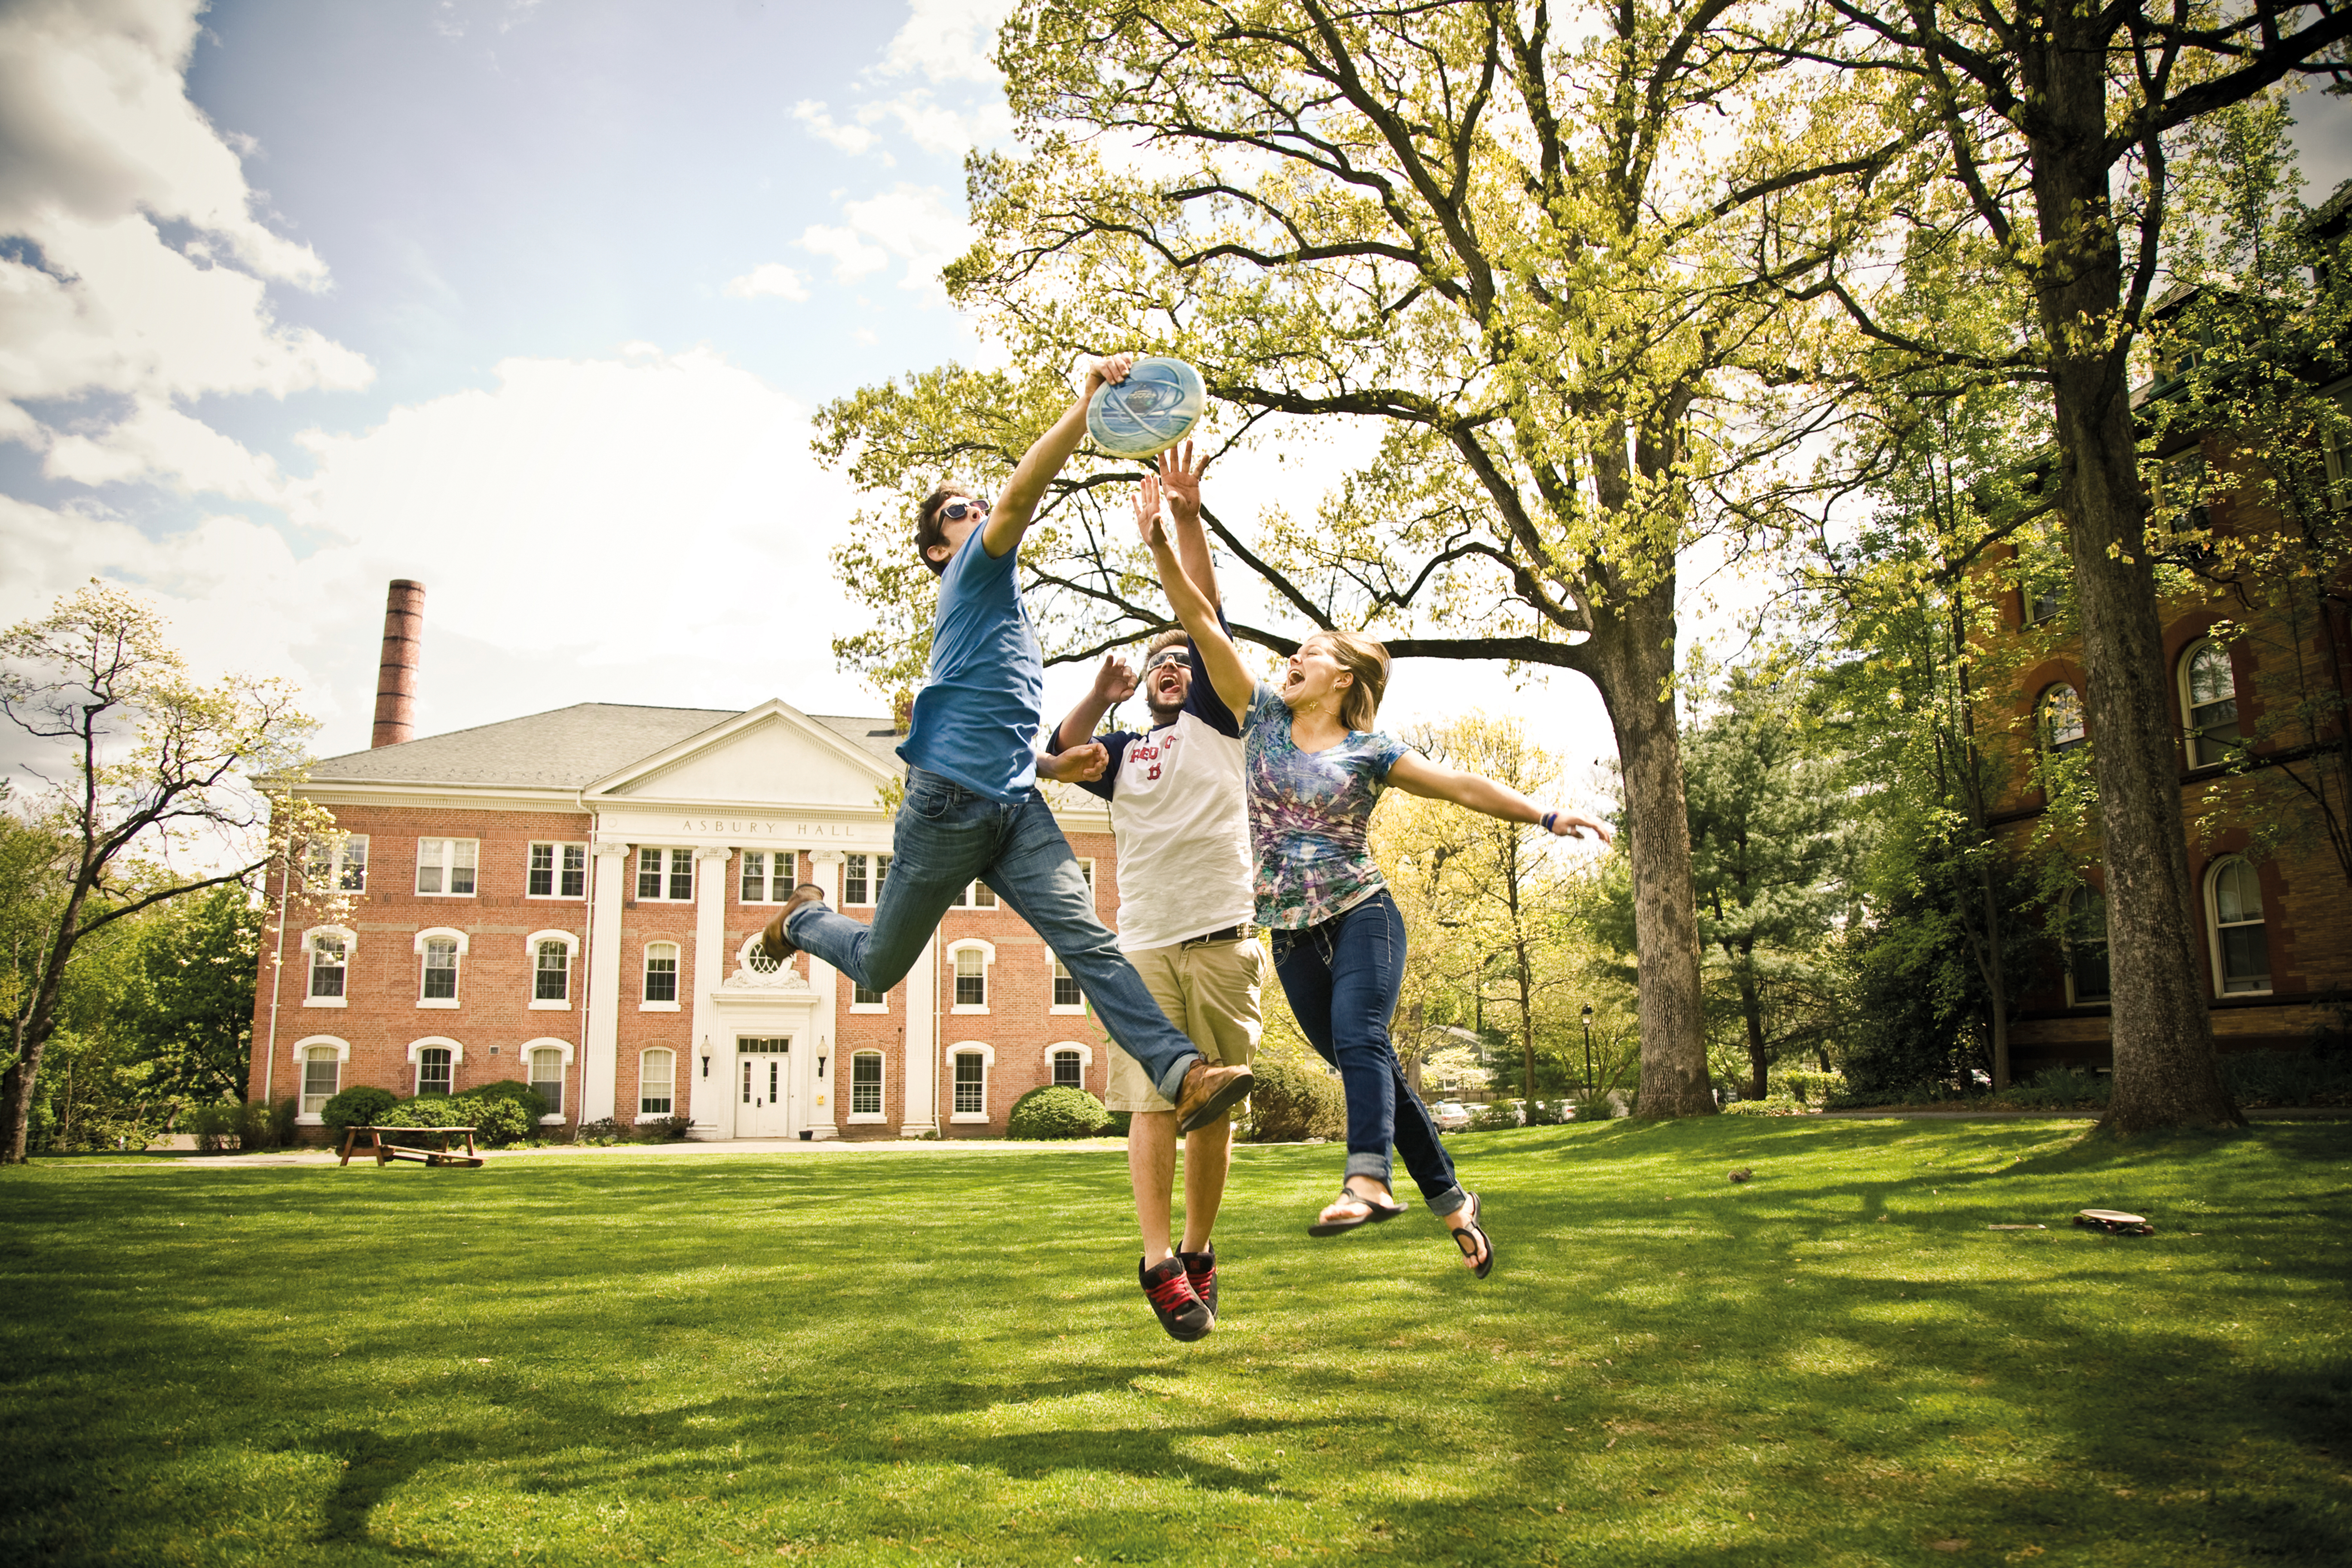 DREW three students playing freezbee outdoors in campus grounds_12295.jpg